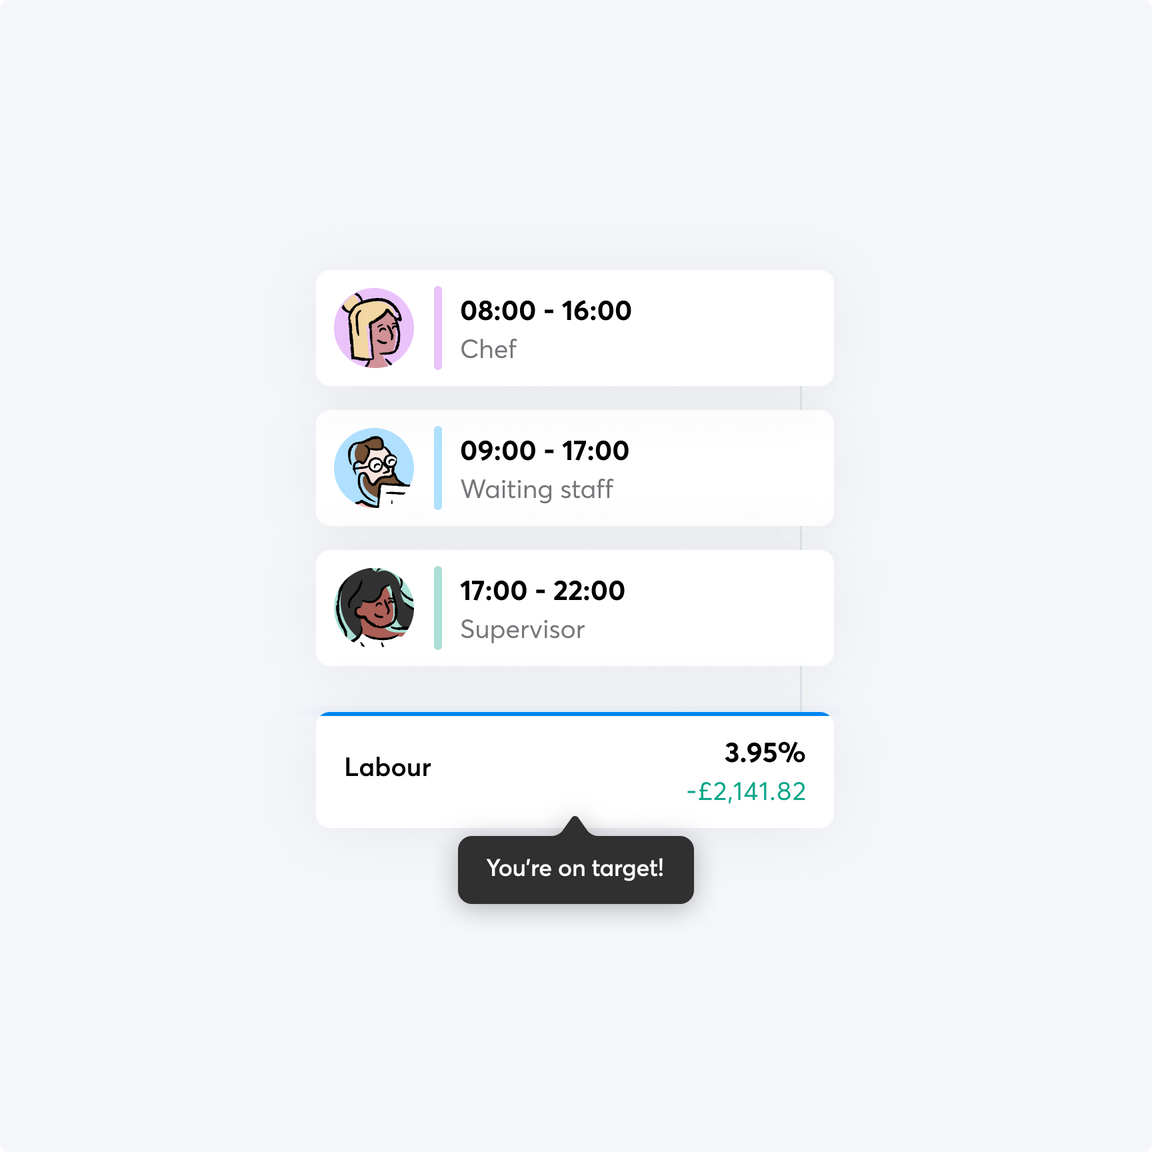 A rota in RotaCloud showing total hours and costs for staff, with red text showing that the rota is currently over budget.